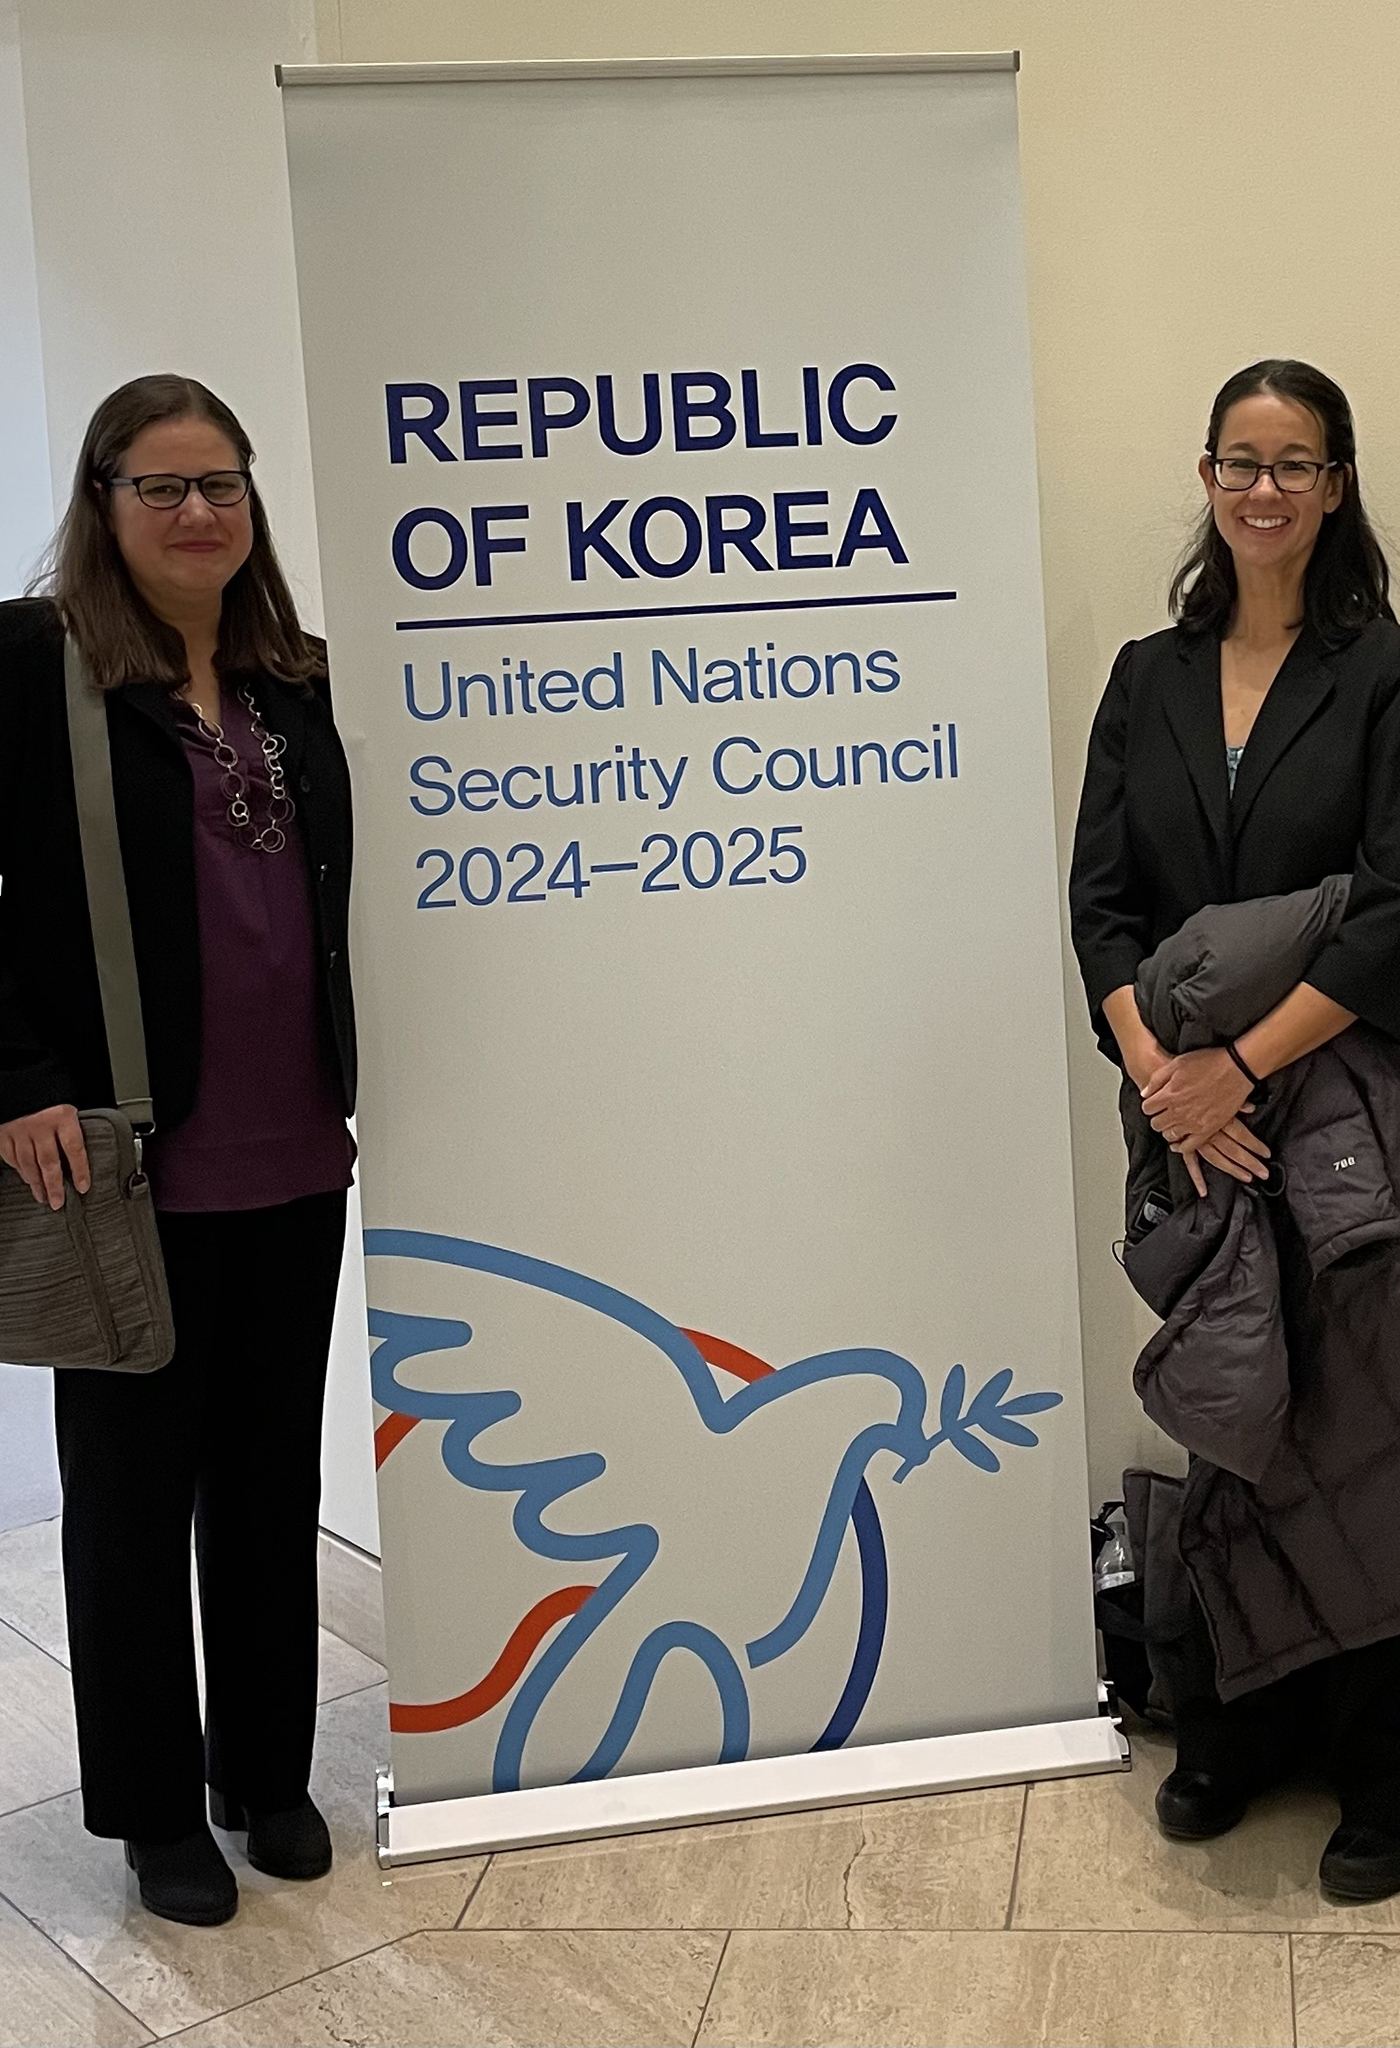 Susan Allen (left) and co-author Amy Yuen visit the South Korean mission in New York. Submitted photo